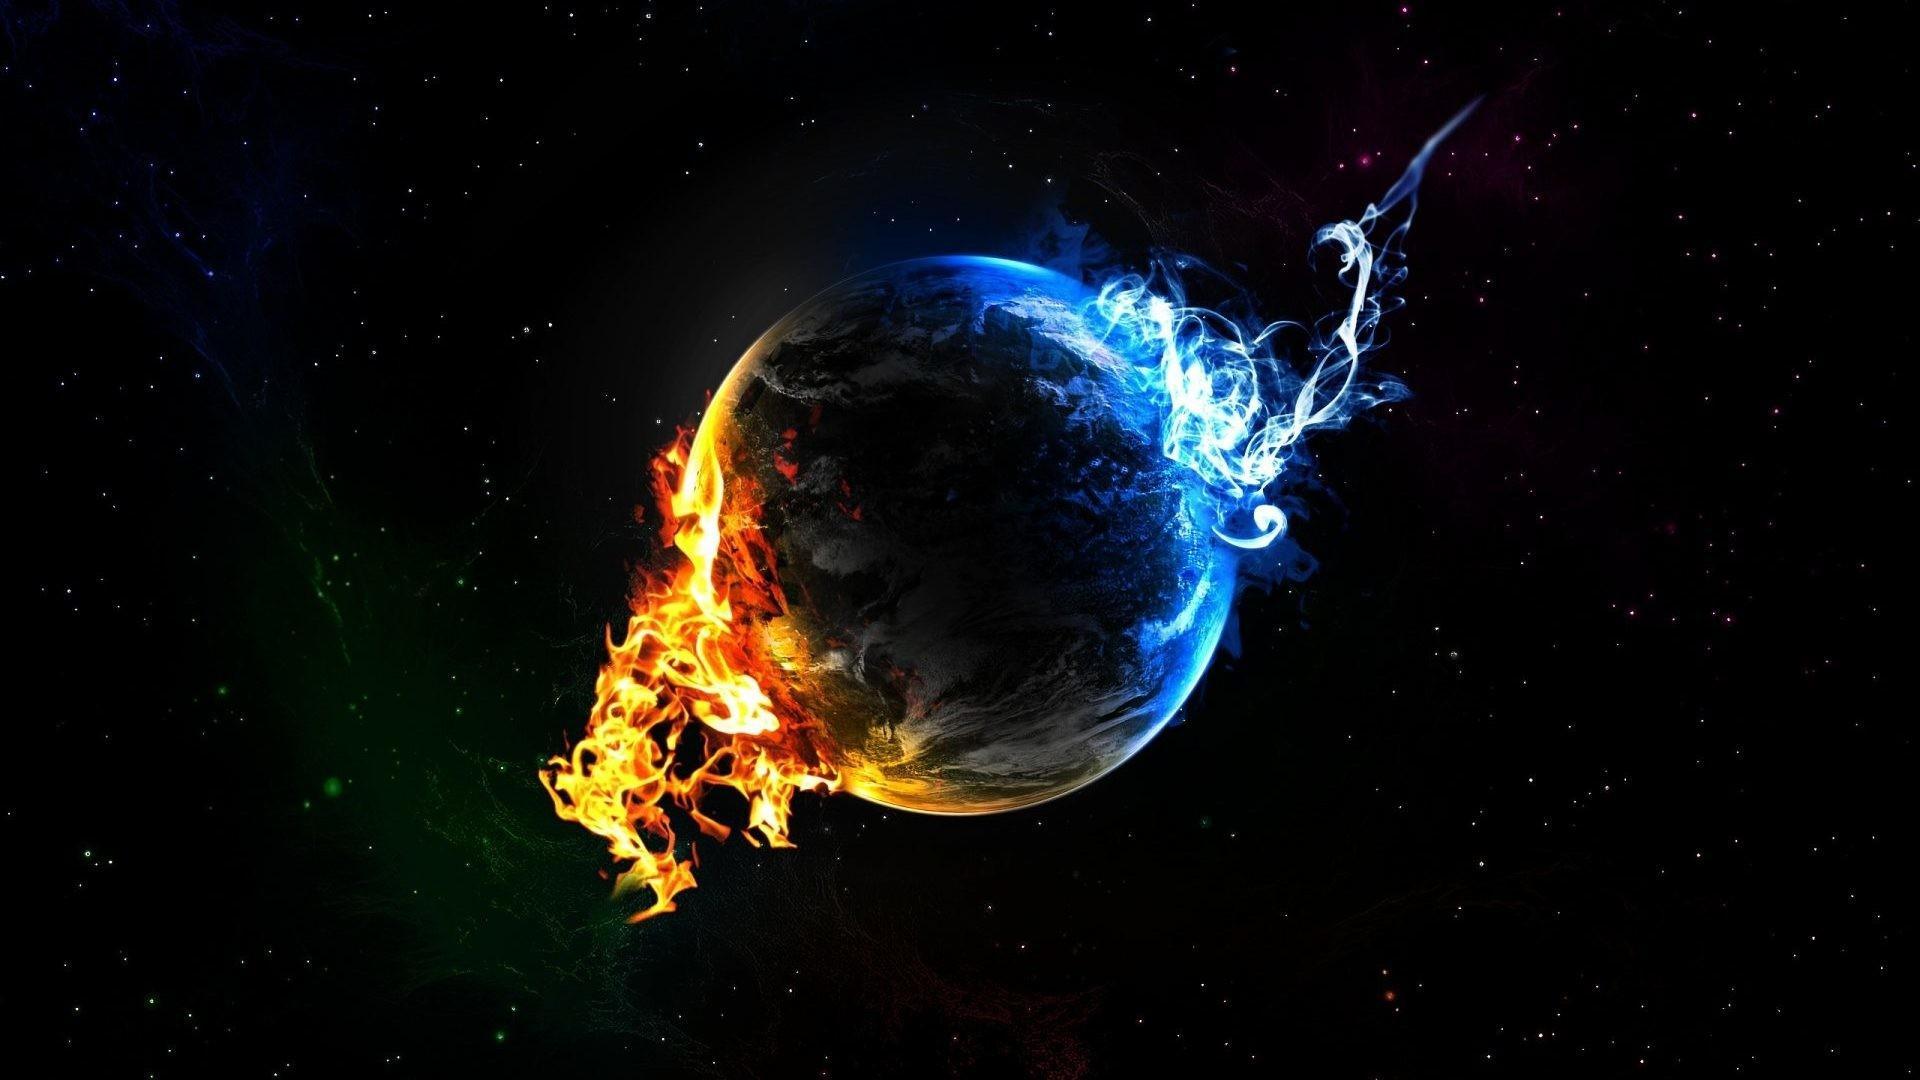 Fire And Ice Live Wallpaper Backgrounds Themes For Android Apk Download